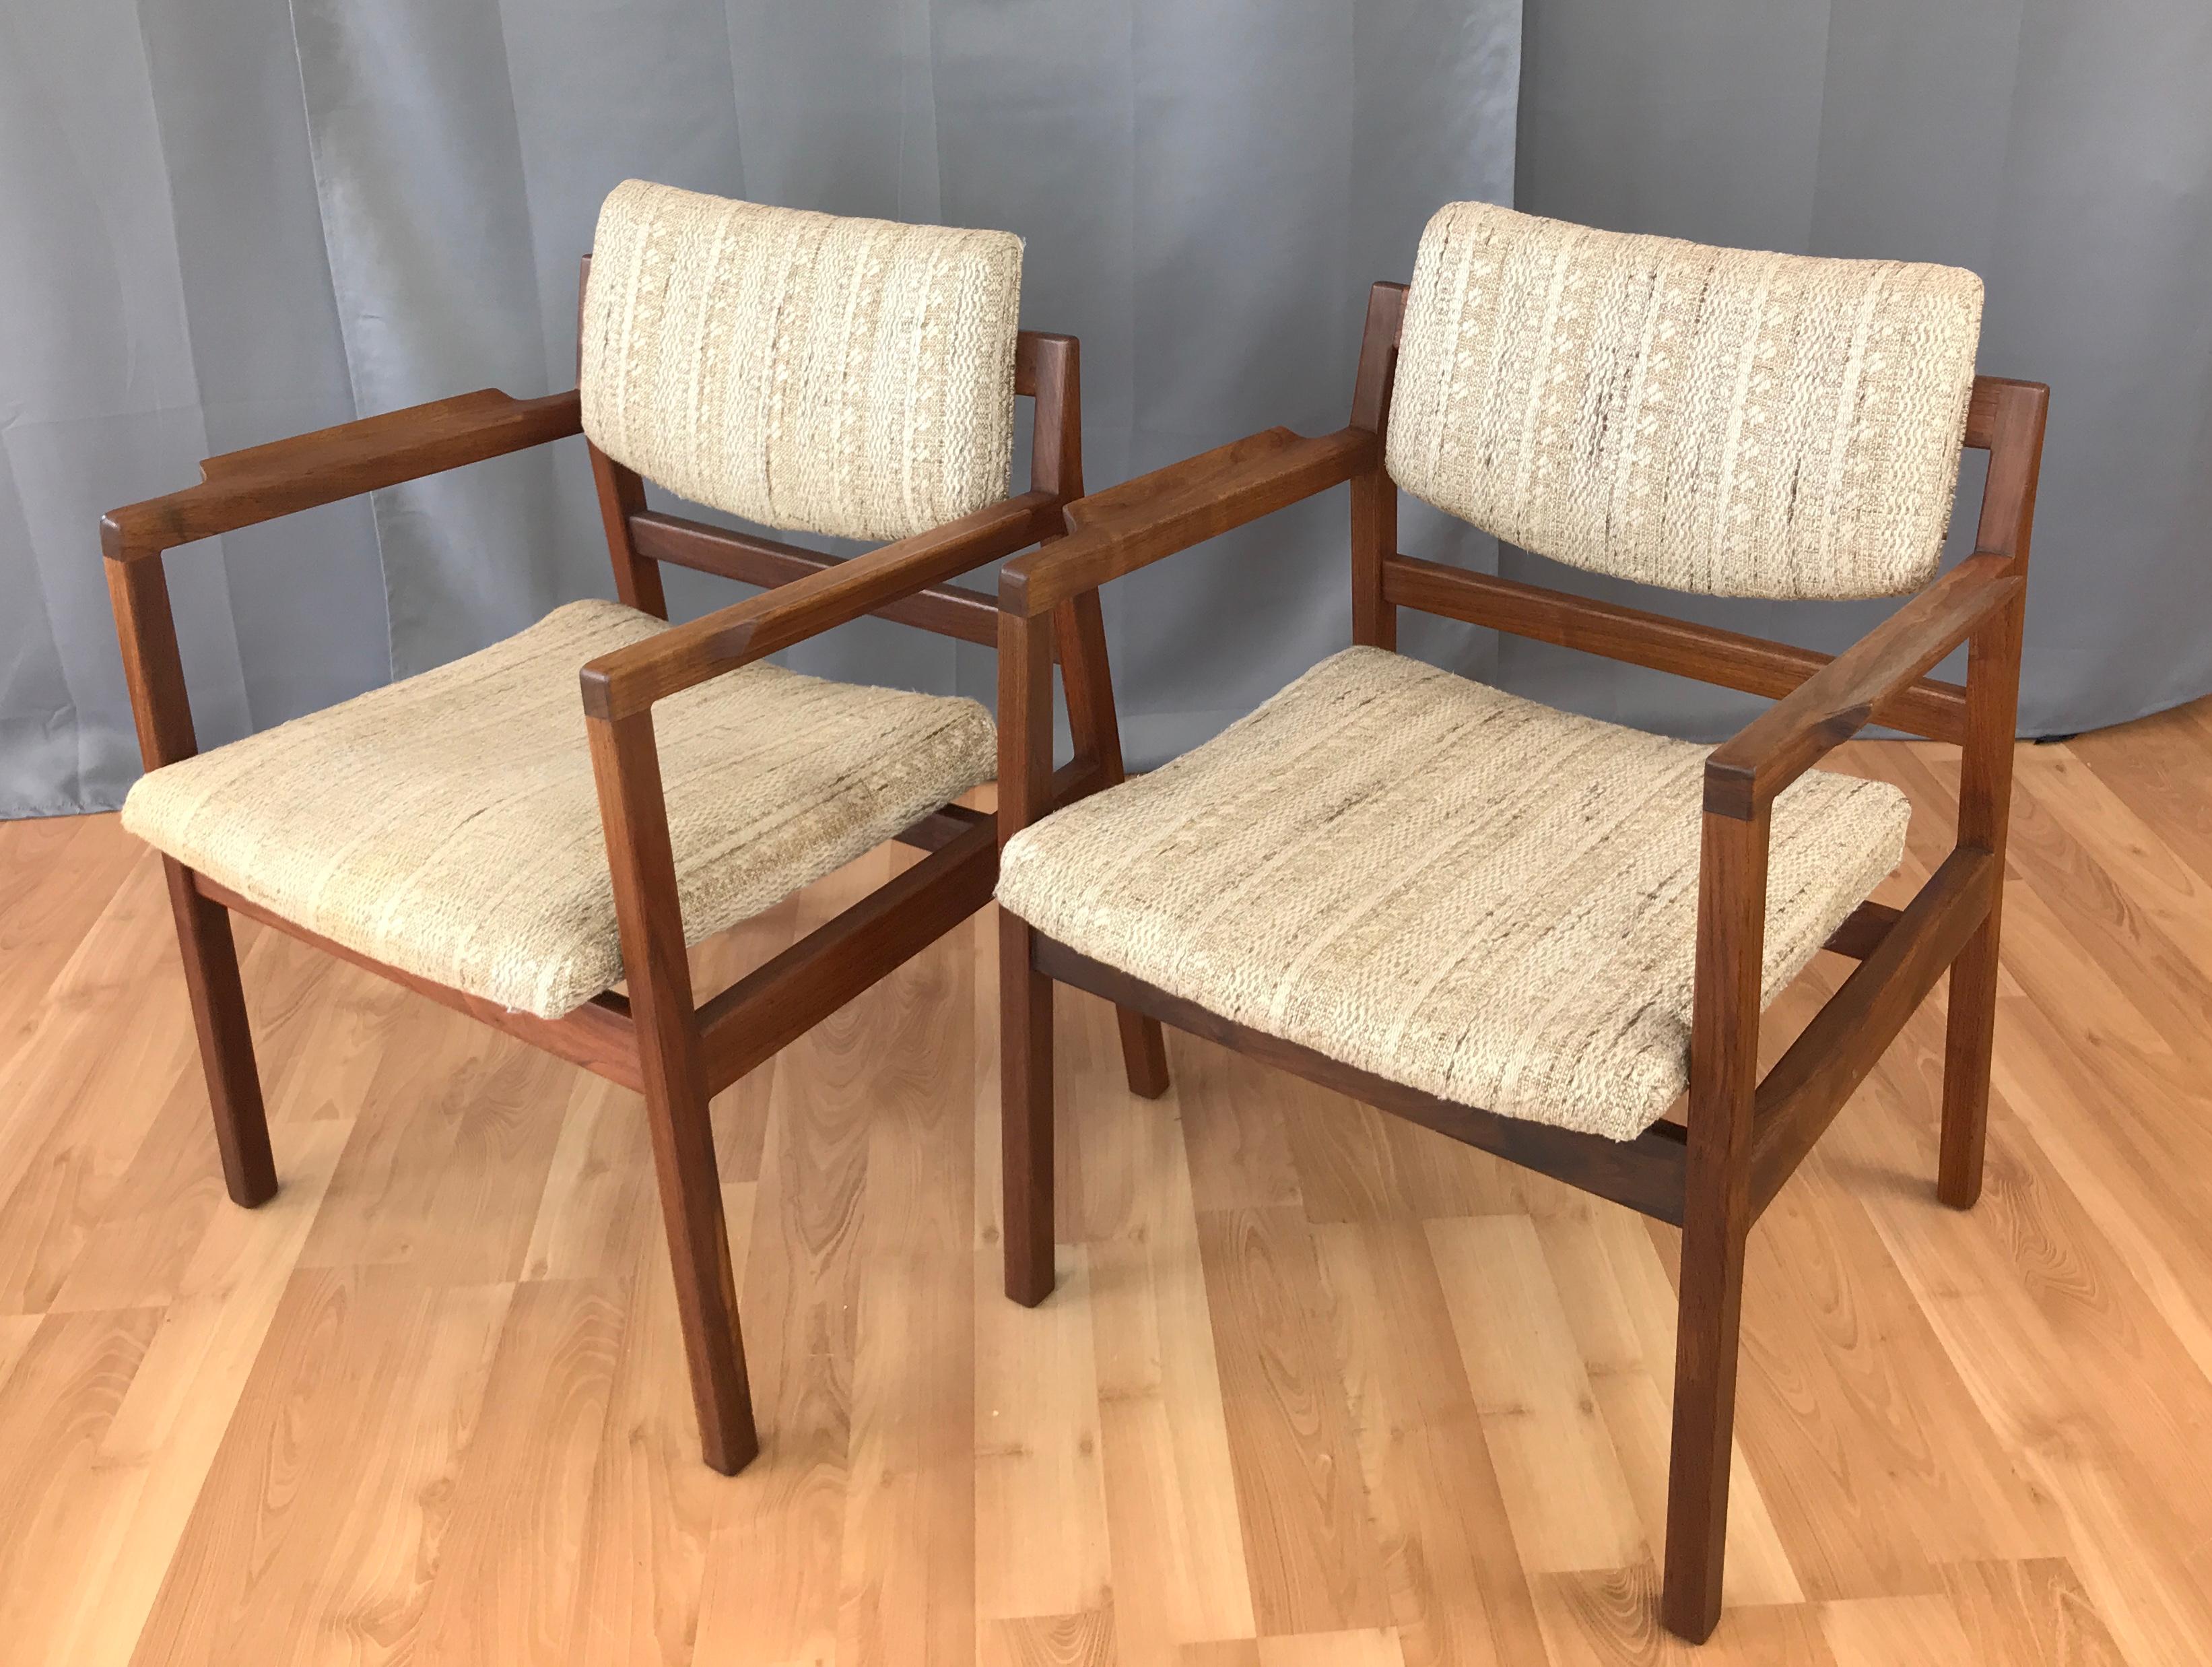 Offered here are a pair of Jens Risom designed Walnut arm chairs, circa 1960s, solid Walnut frames.